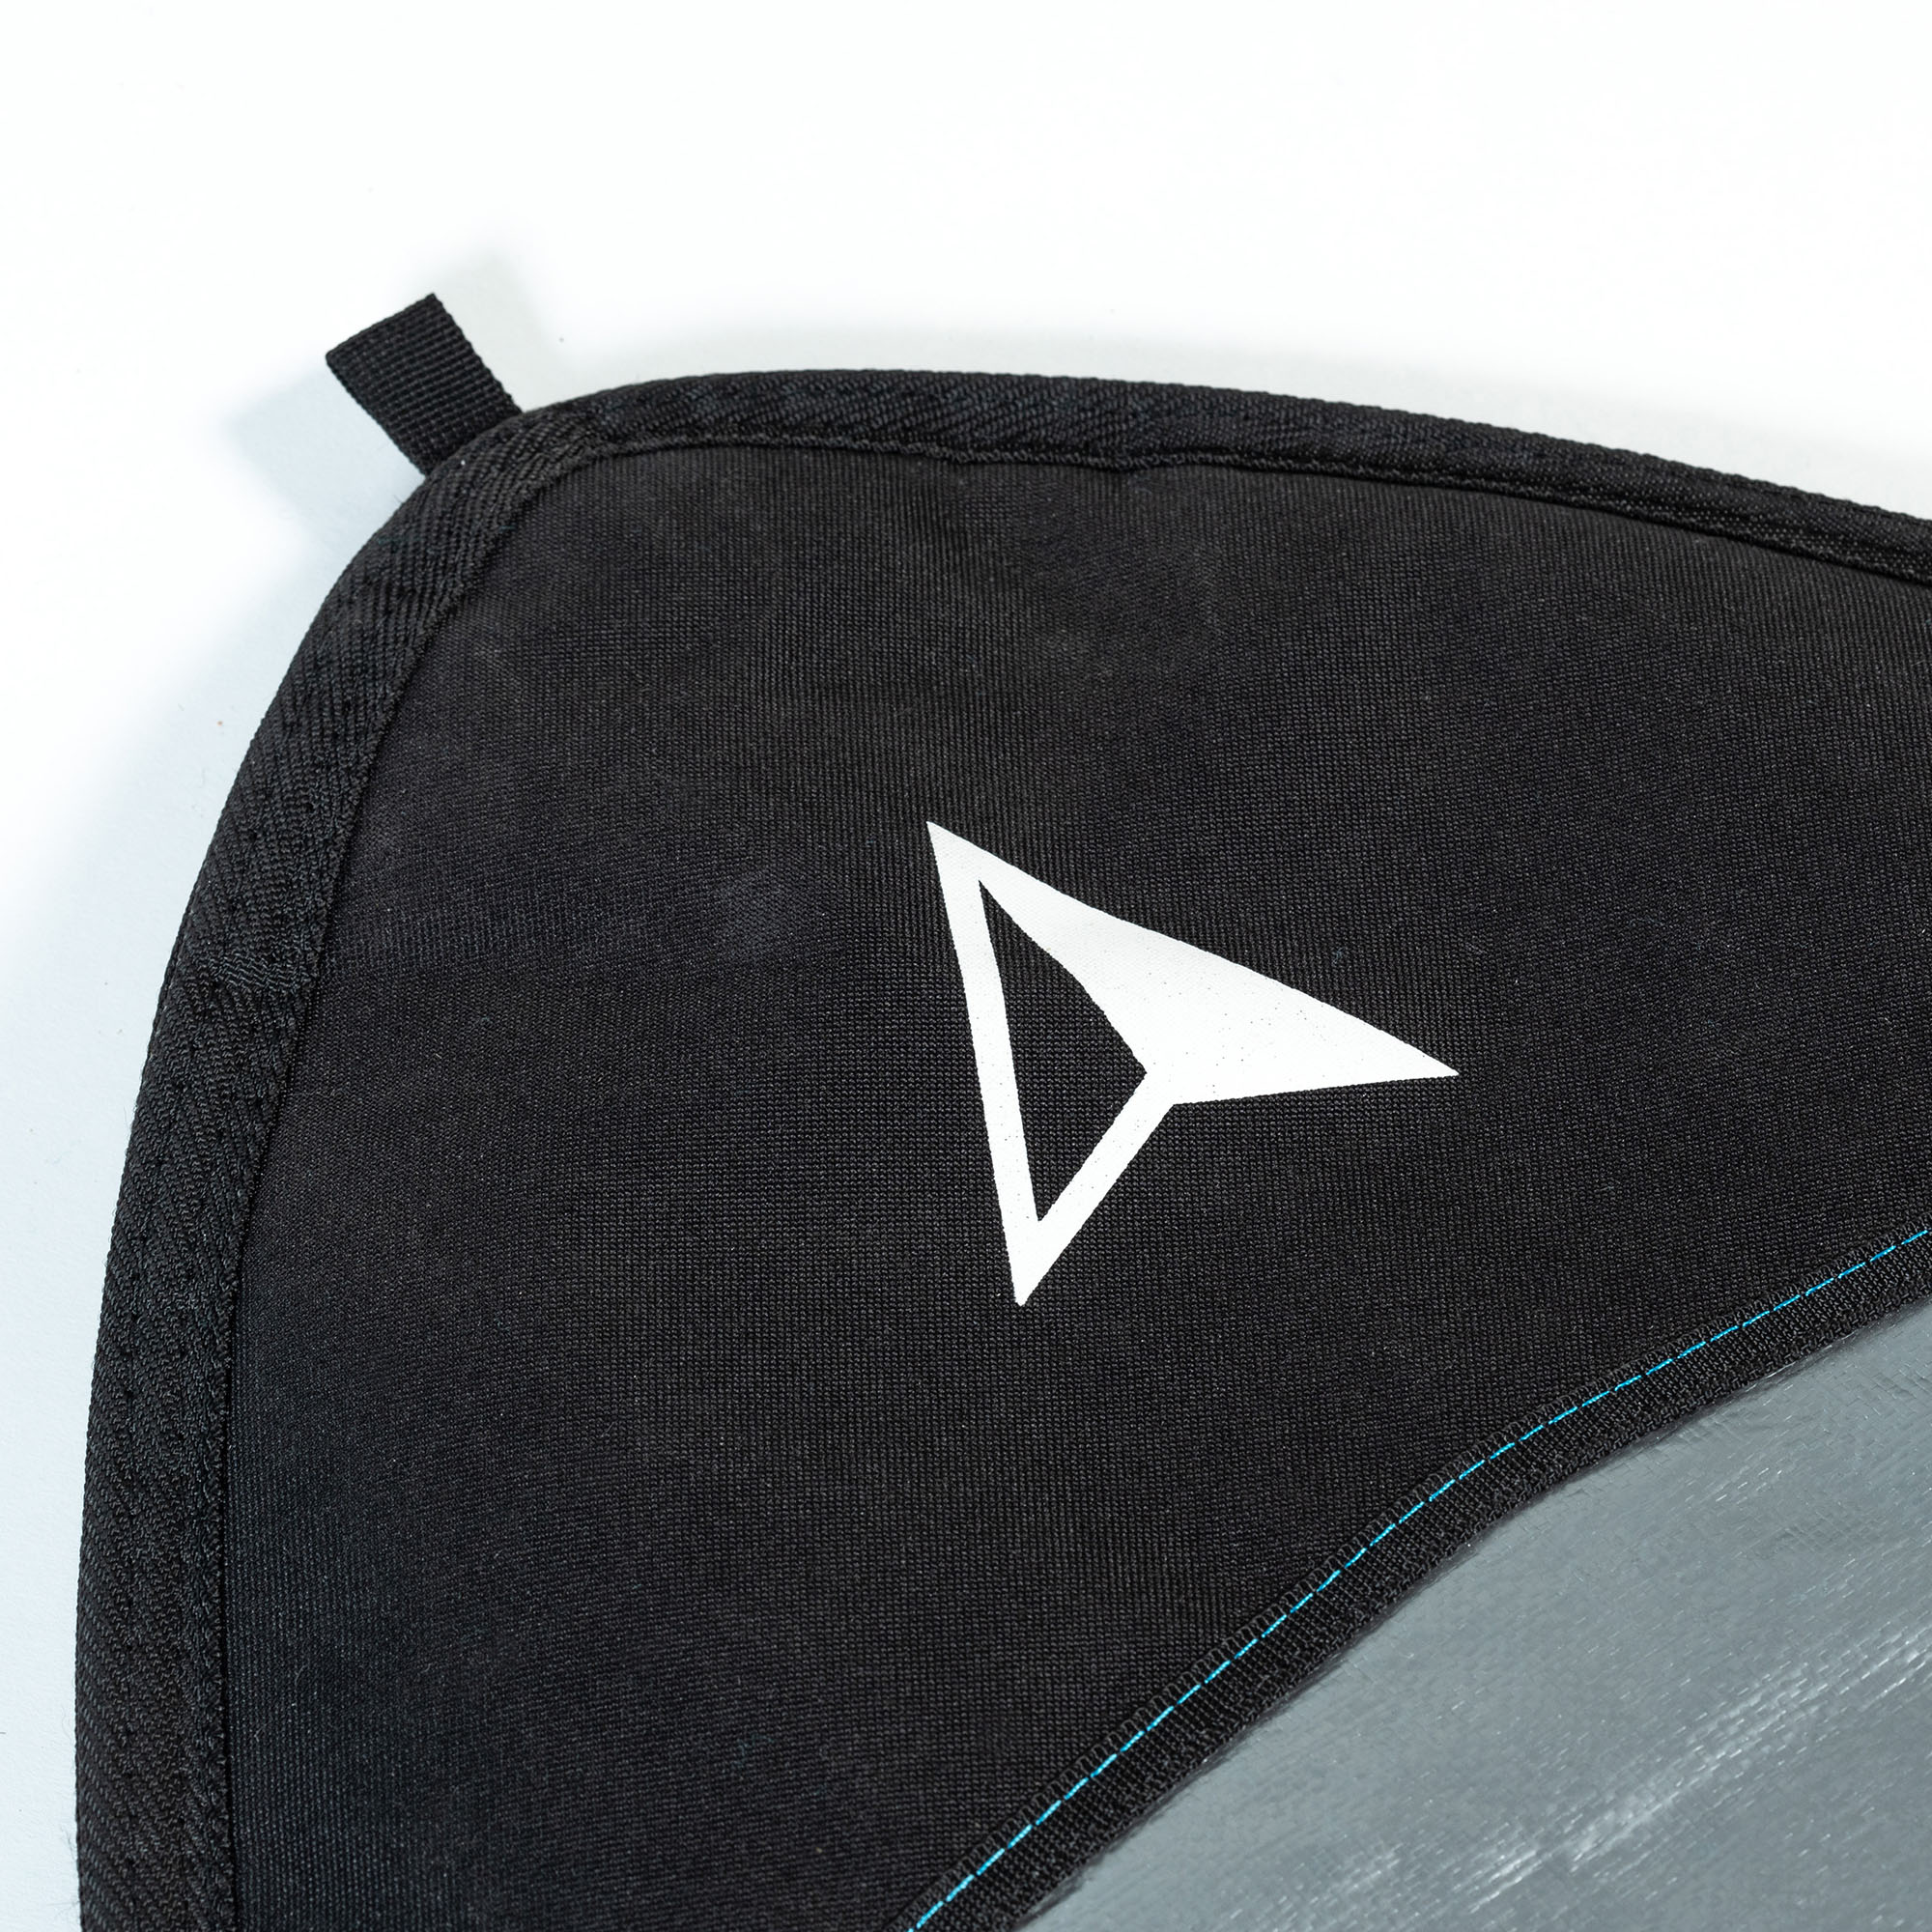 ROAM Boardbag Surfboard Tech Bag Funboard - REINFORCED NOSE AND TAIL FOR EXTRA PROTECTION (WITH UTILITY LOOP)